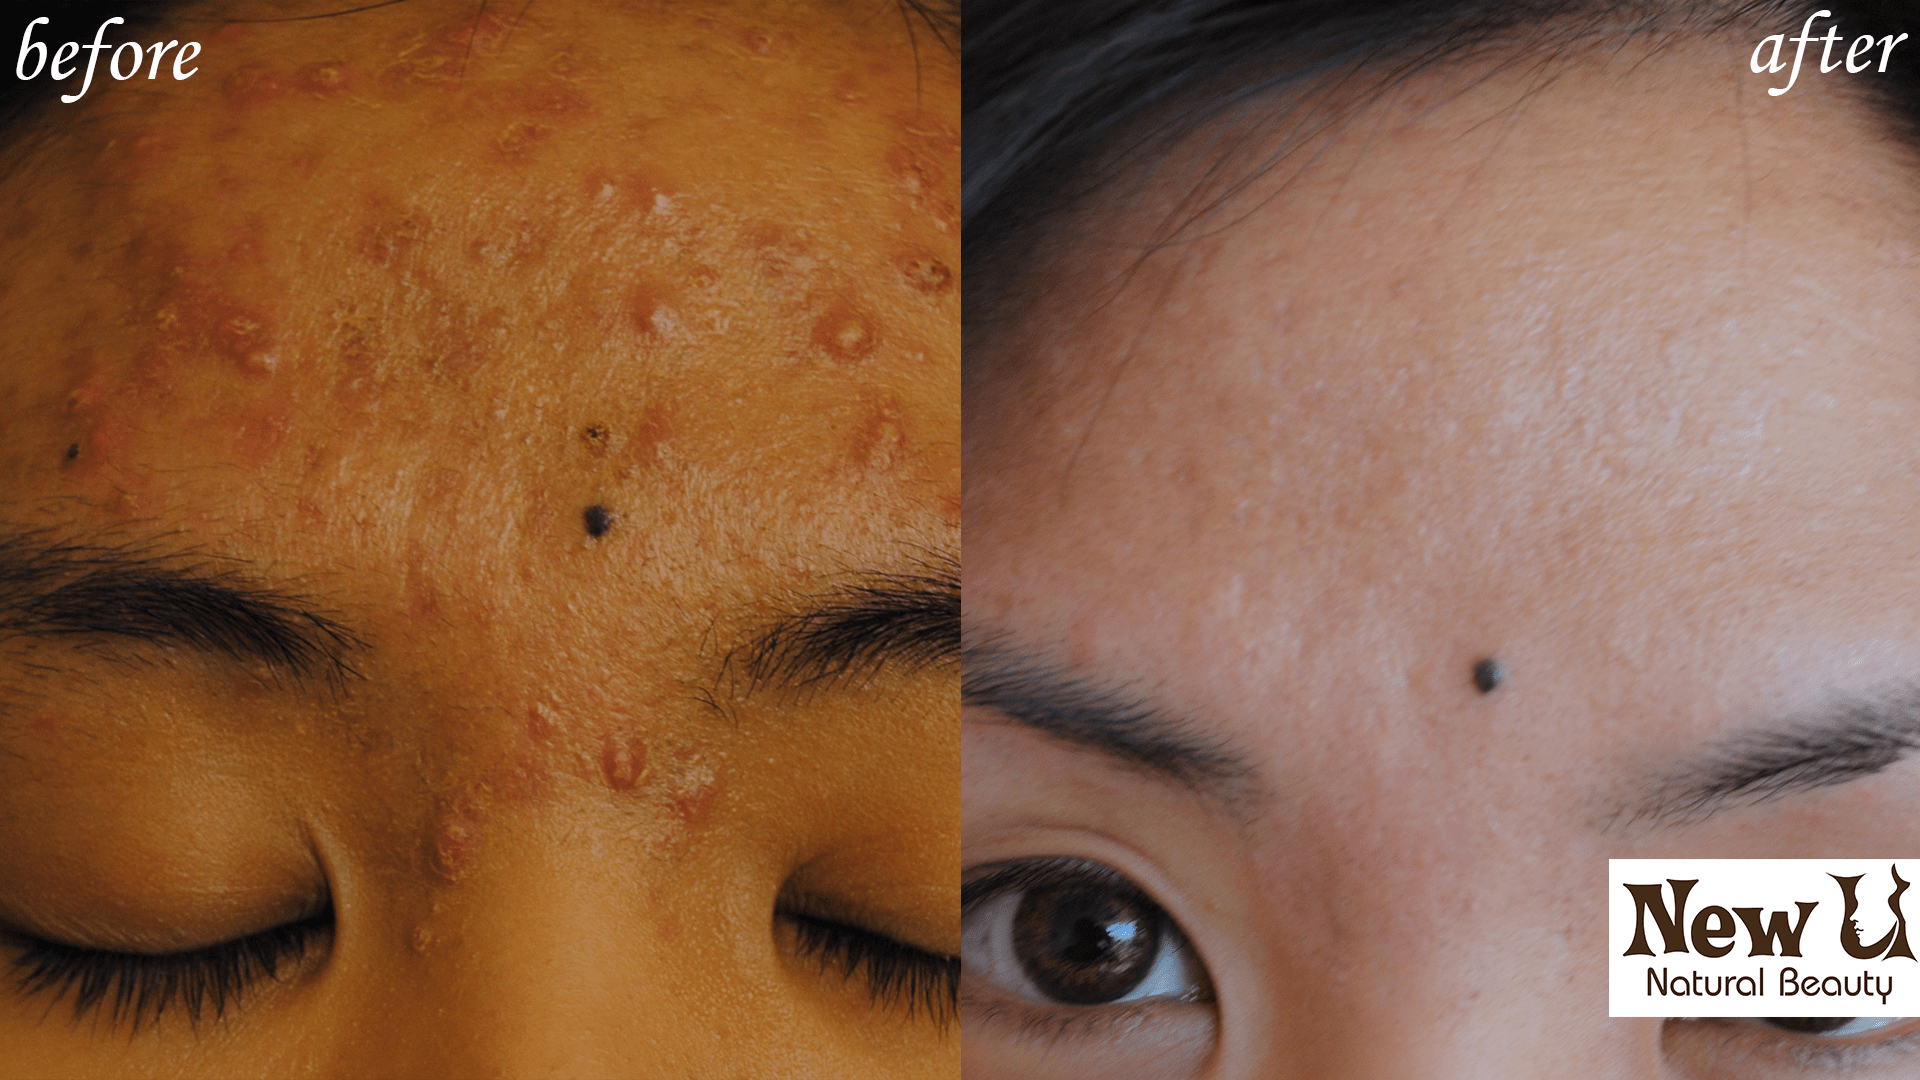 Acne Treatment Scar Removal Services Las Vegas Before and After